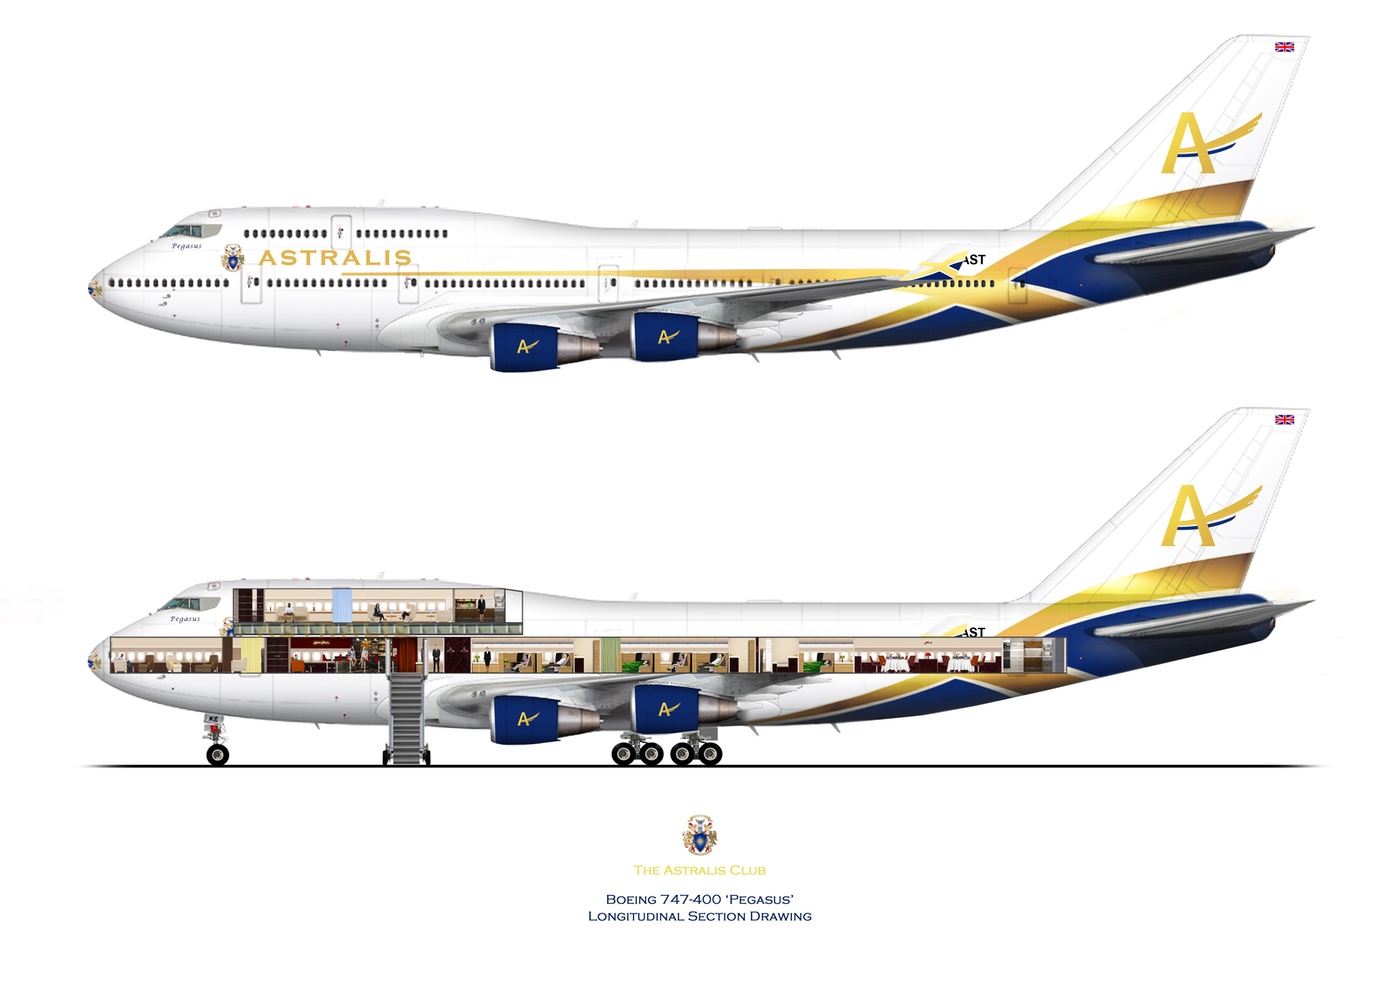 Astralis Air _The Astralis ClubB747-400 Livery and INTERIOR longitudinal section drawing